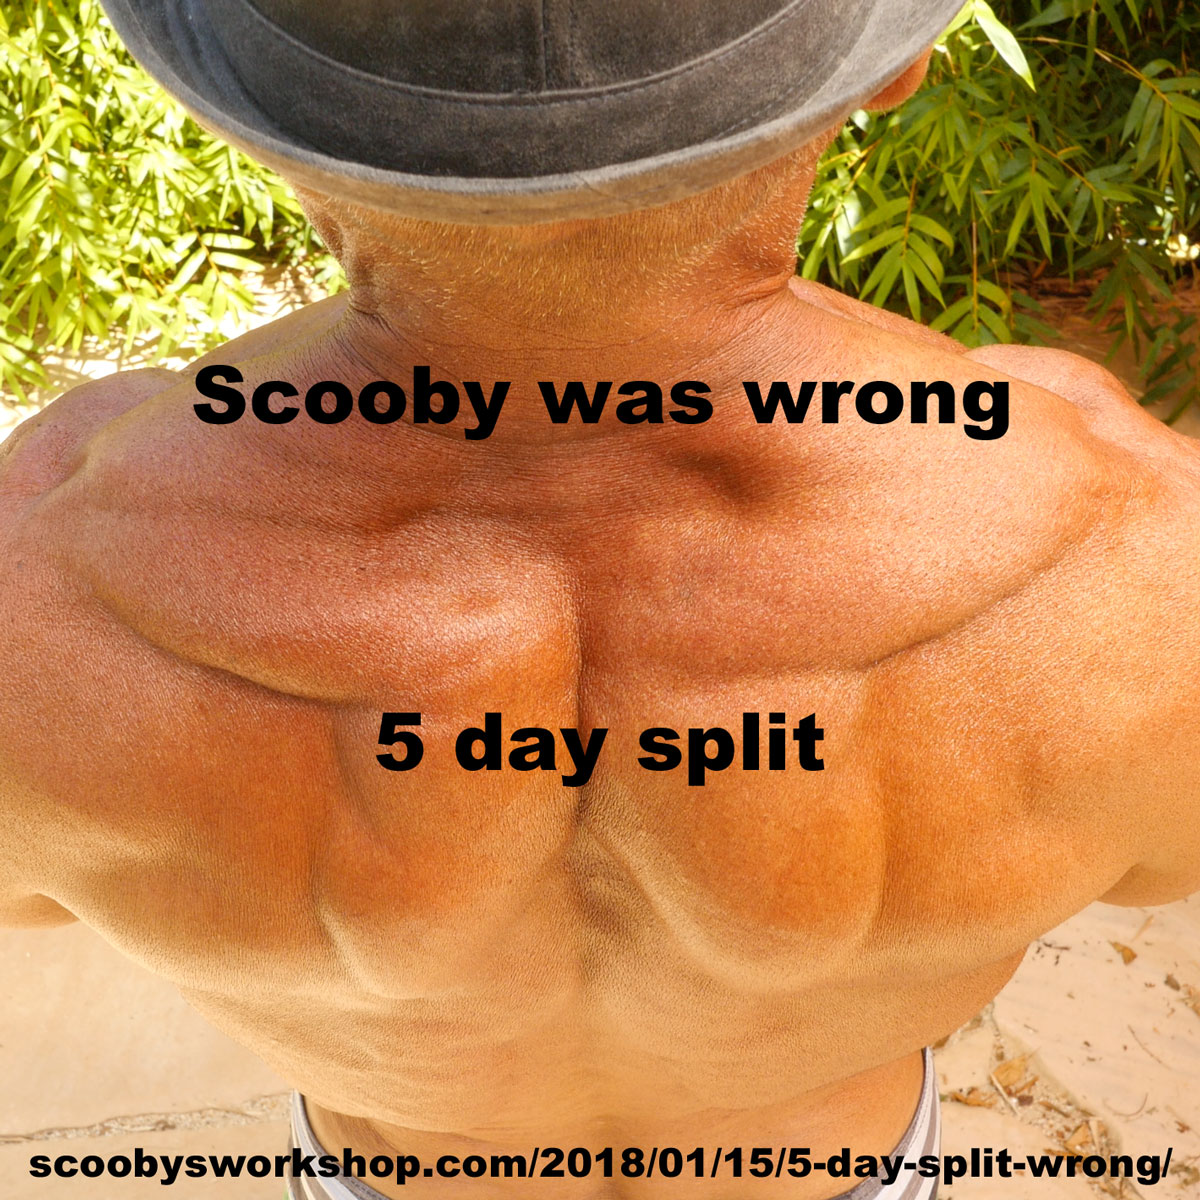 Scooby-was-wrong-5-day-split